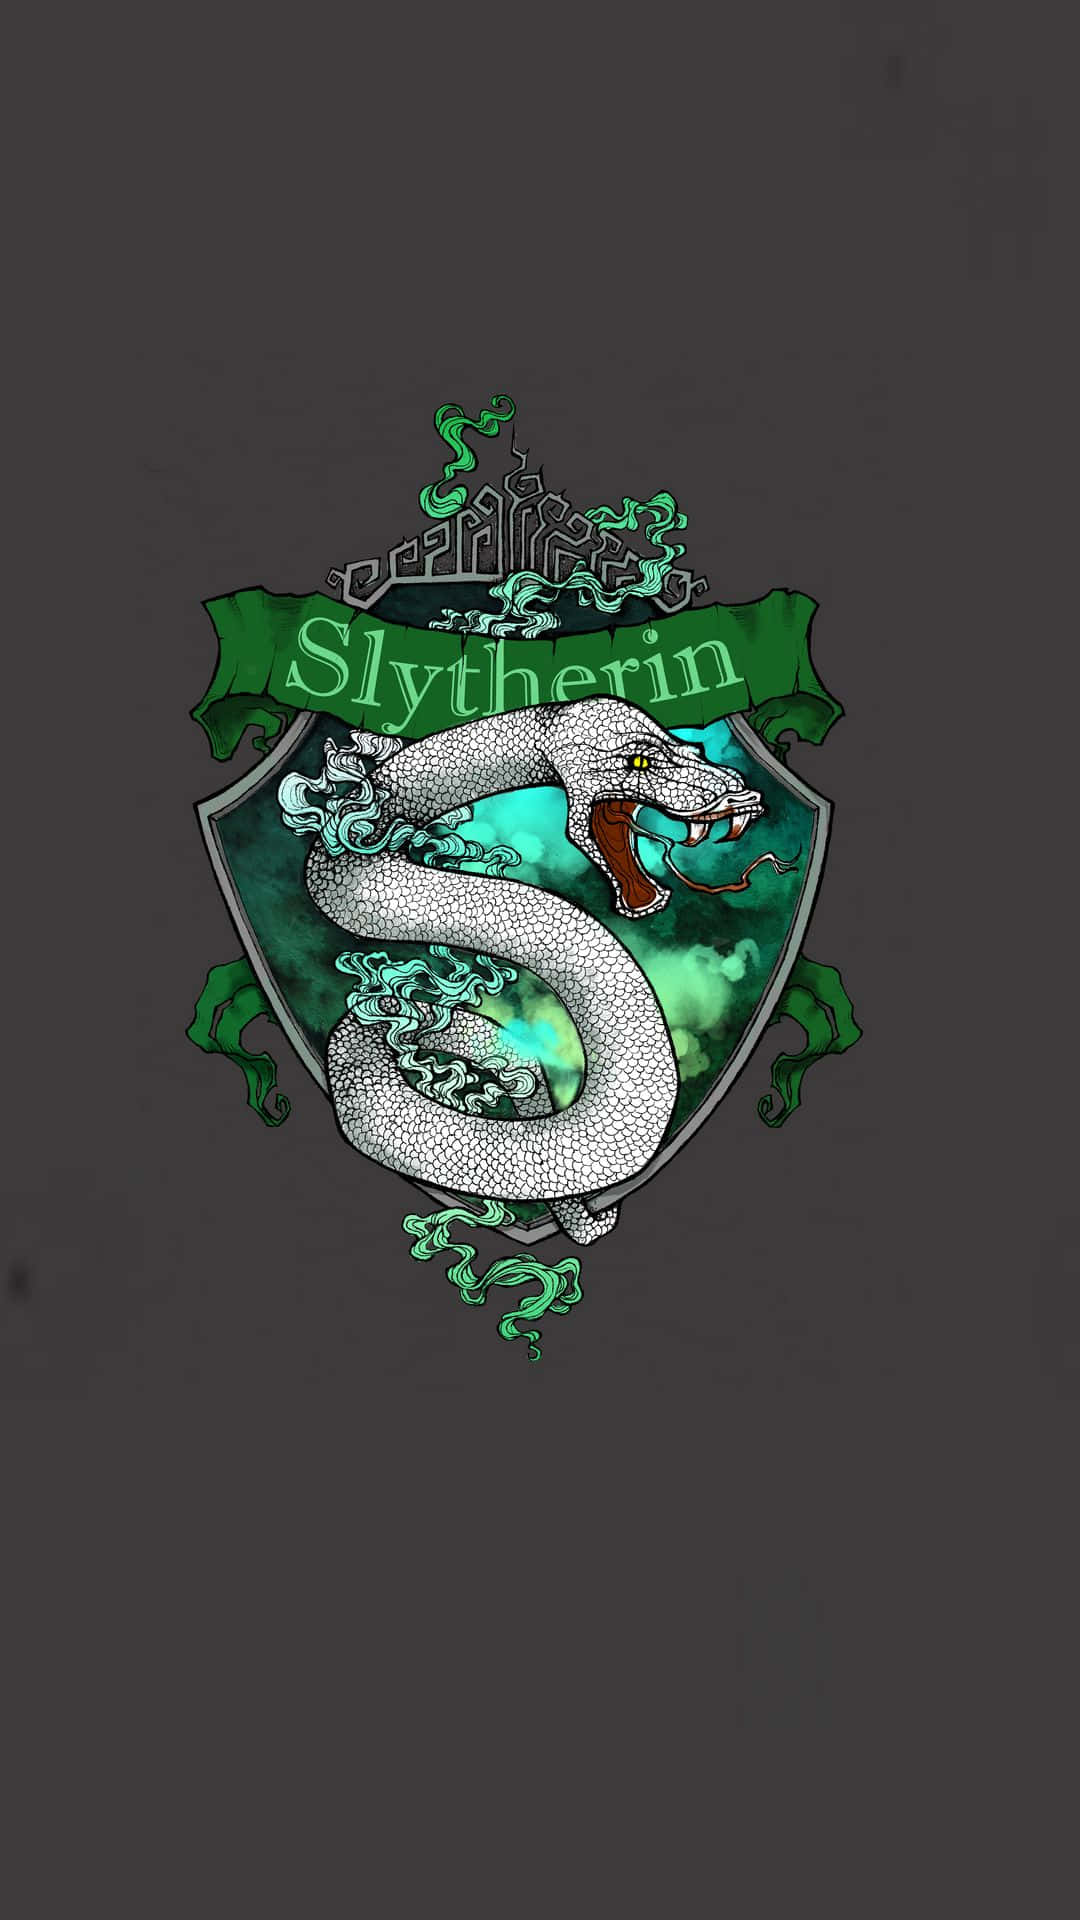 Get your Slytherin Phone now and get ready for some magic! Wallpaper